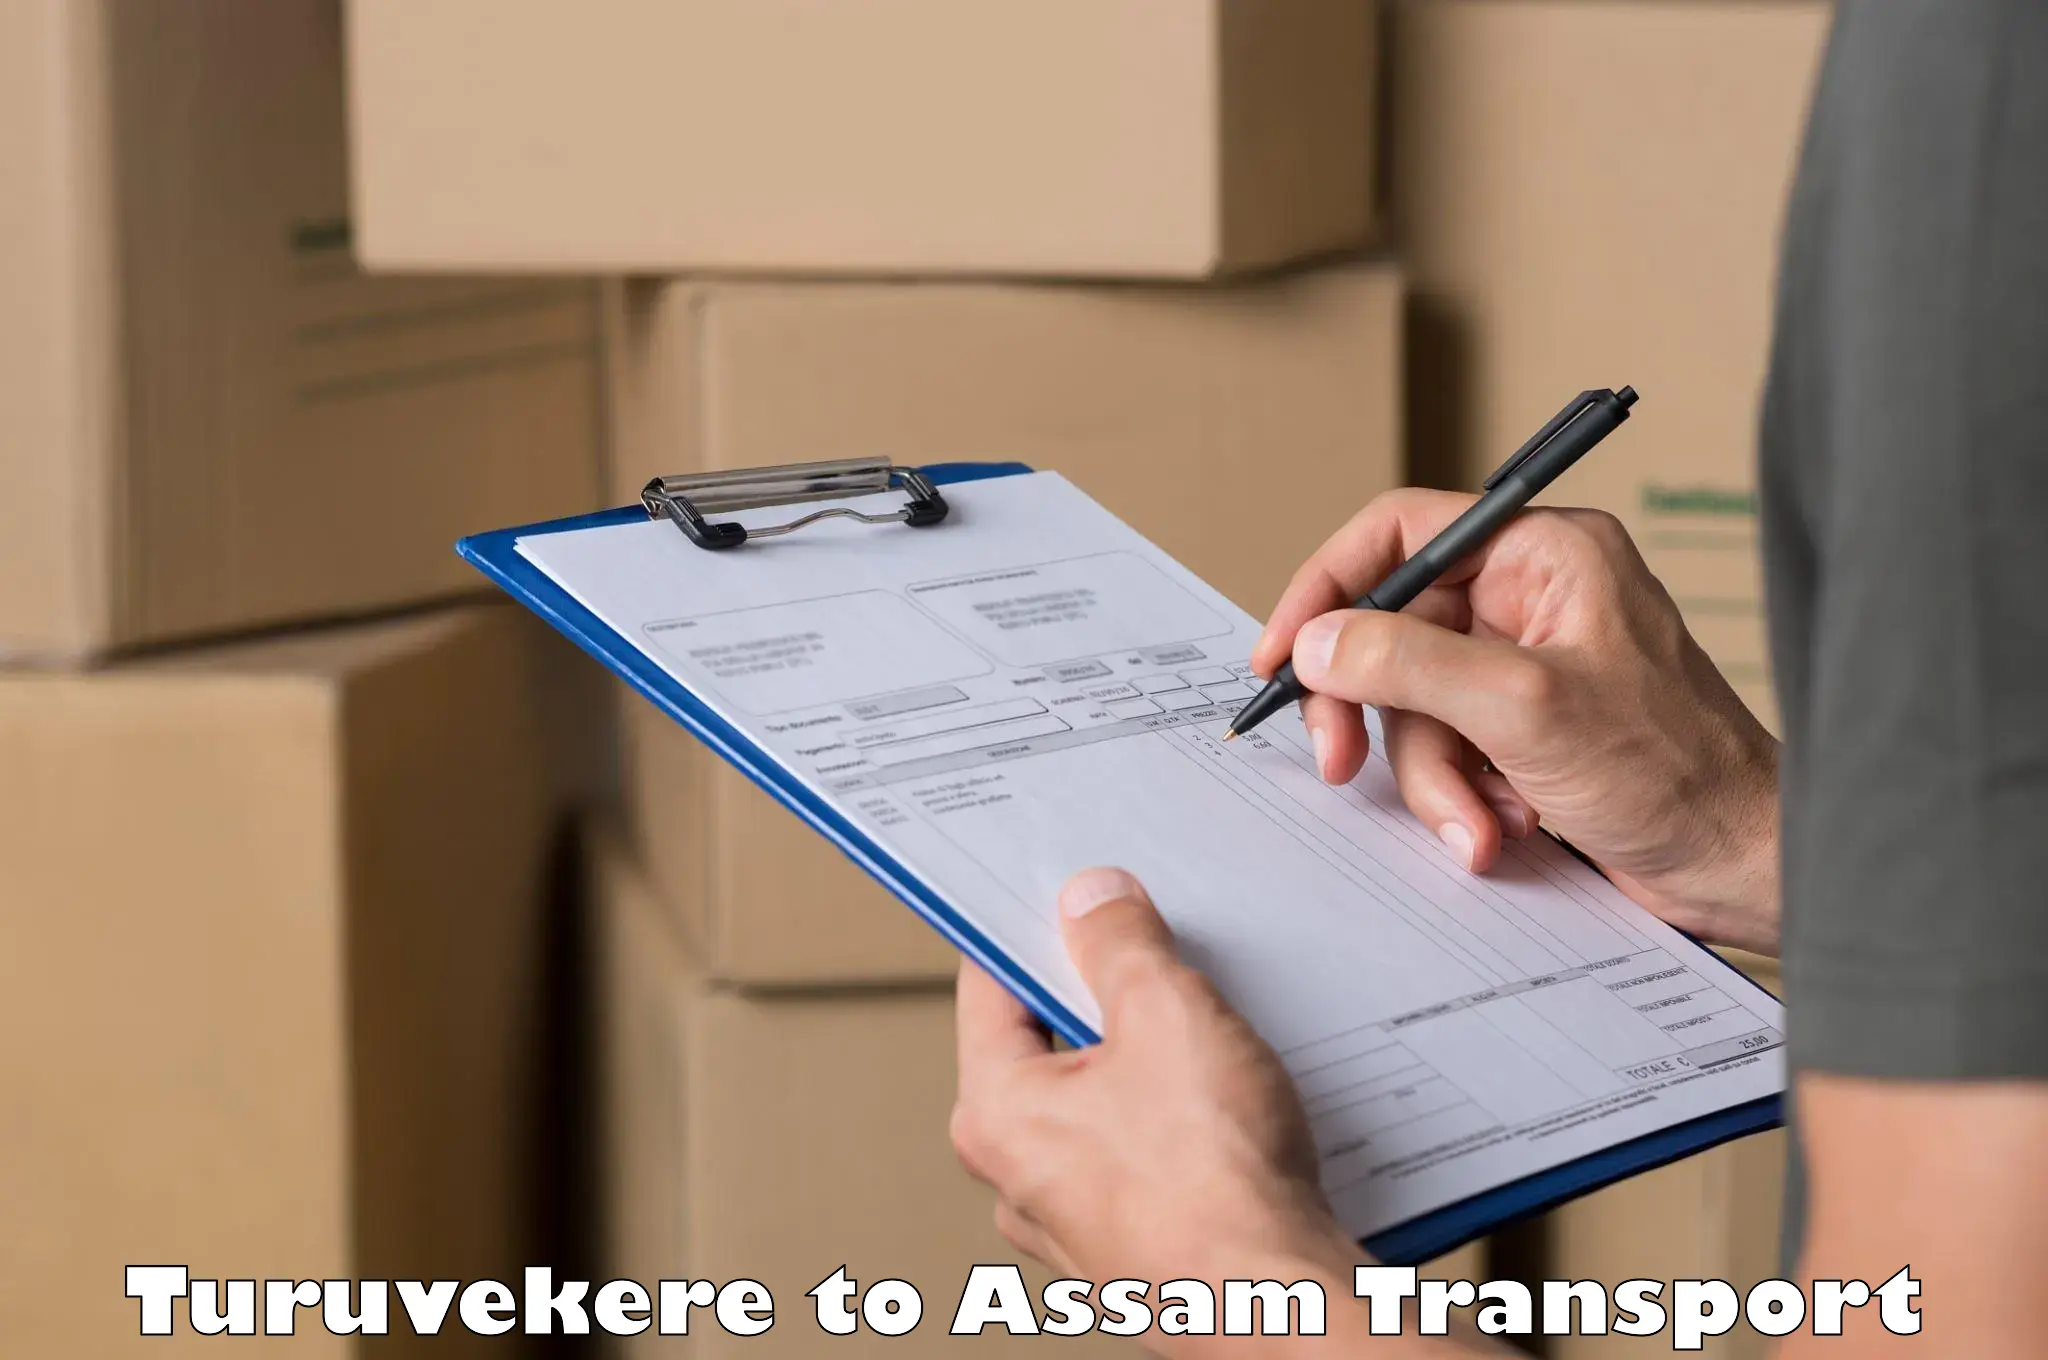 Container transport service Turuvekere to Assam